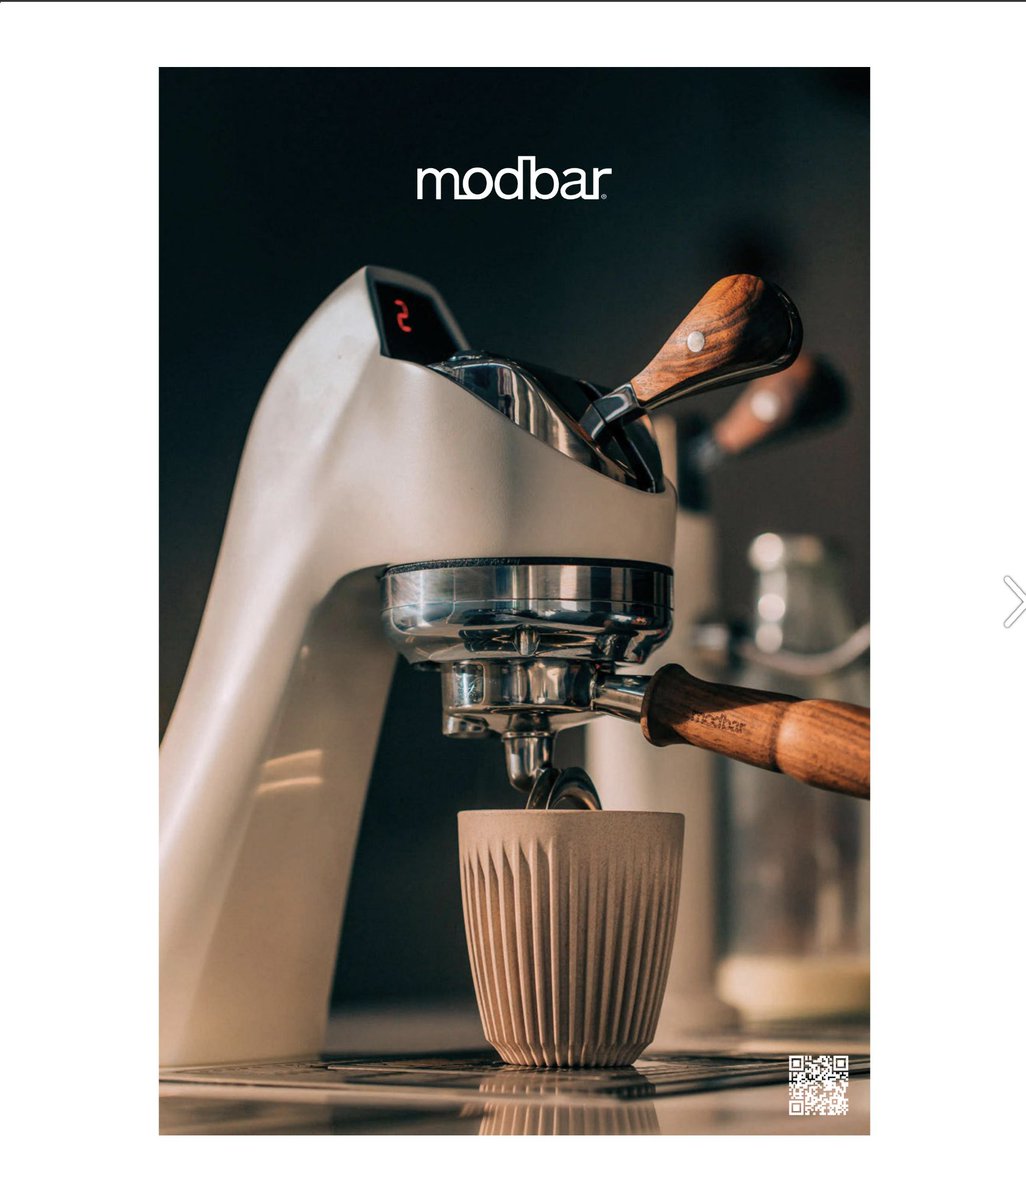 last adv I worked on for @modbar, as appeared on @SupperMagazine ! Less is more.  #coffee #specialtycoffee  #latteart #adv #design #digitalmag #magazine #graphicdesign #graphicdesigner #designer #graphics